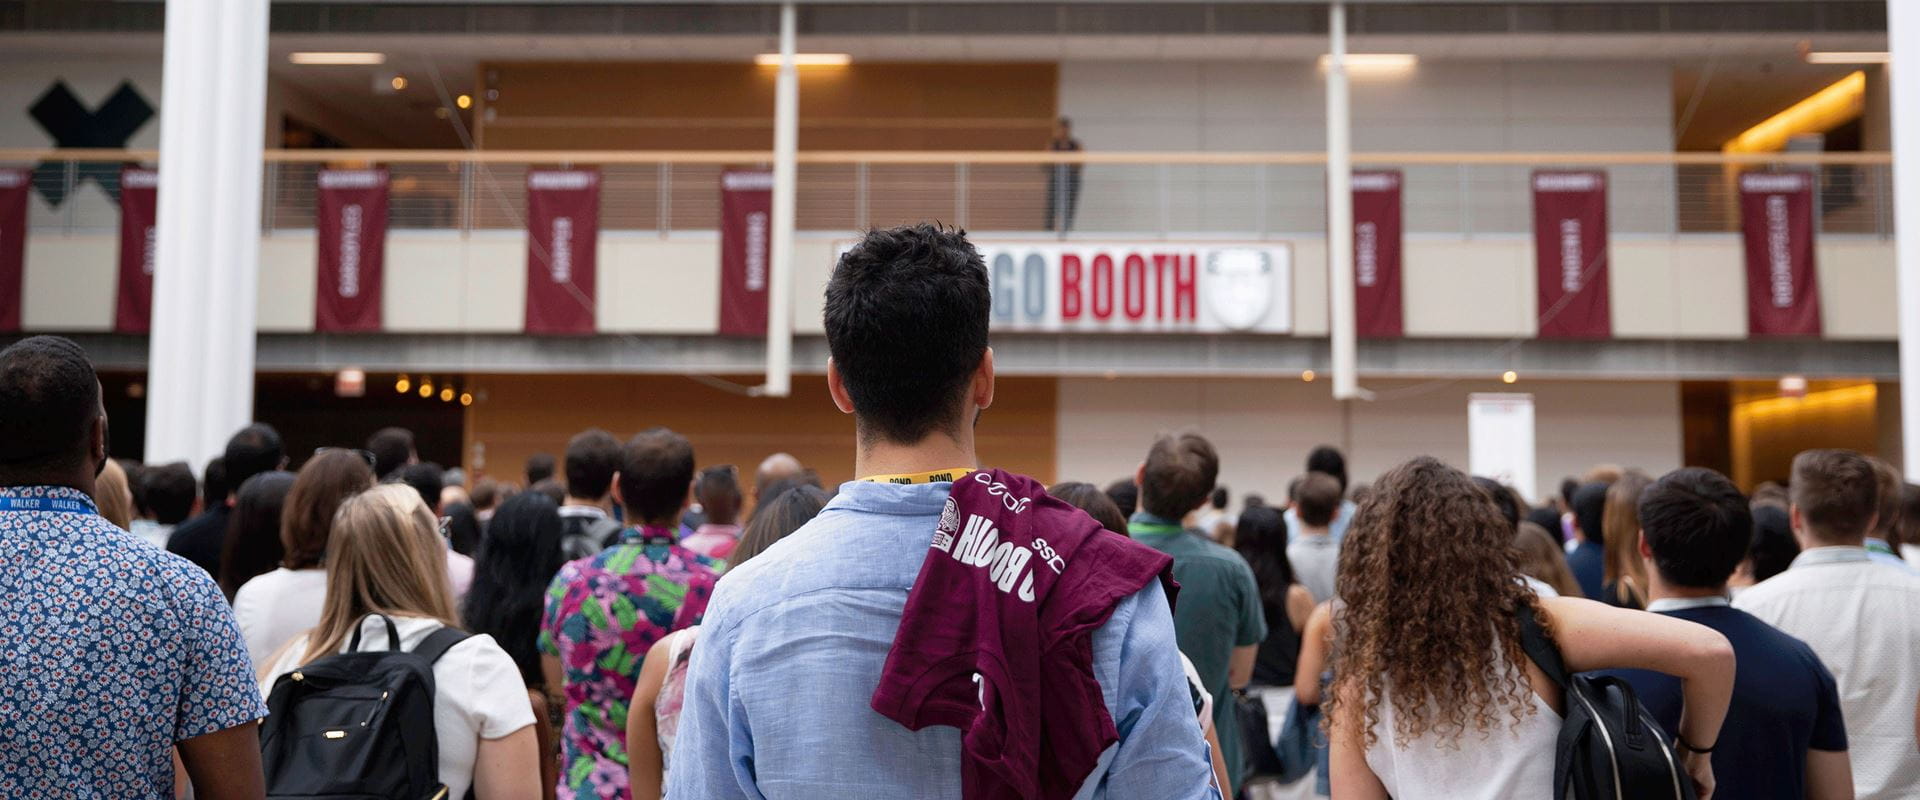 Chicago Booth | The University of Chicago Booth School of Business